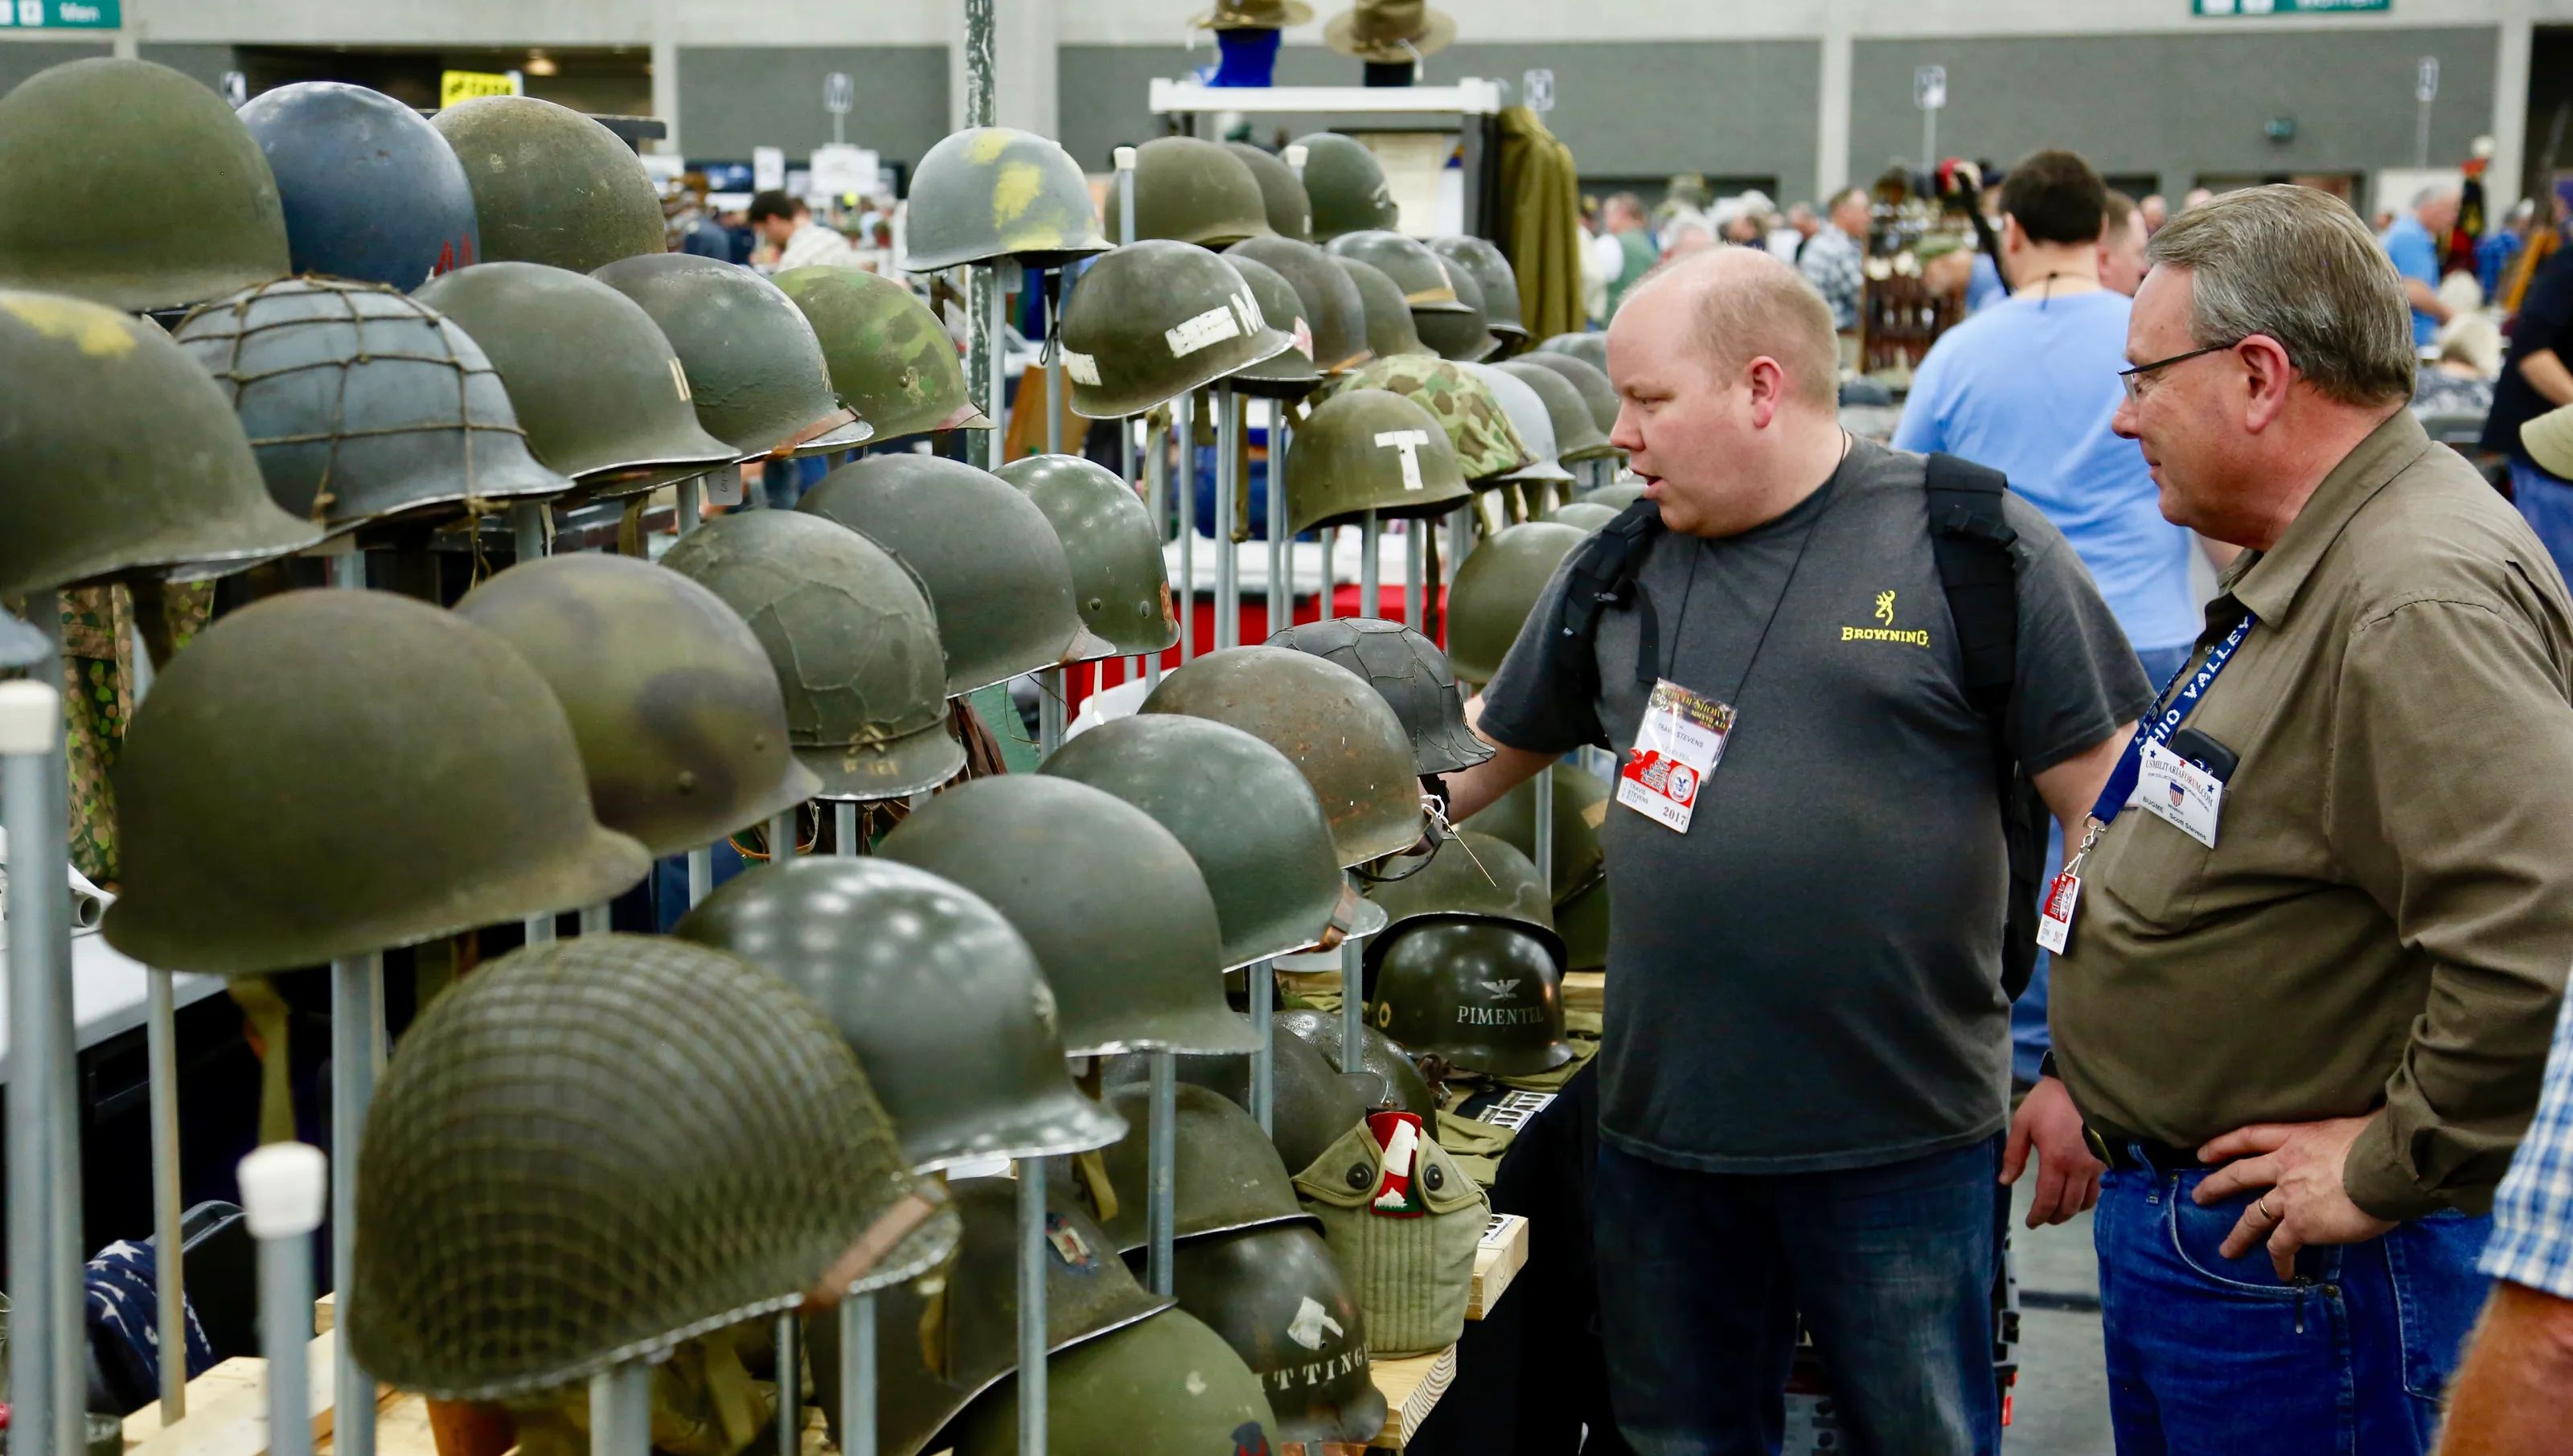 MILITARY COLLECTIBLE SHOW, Biloxi, Mississippi, United States